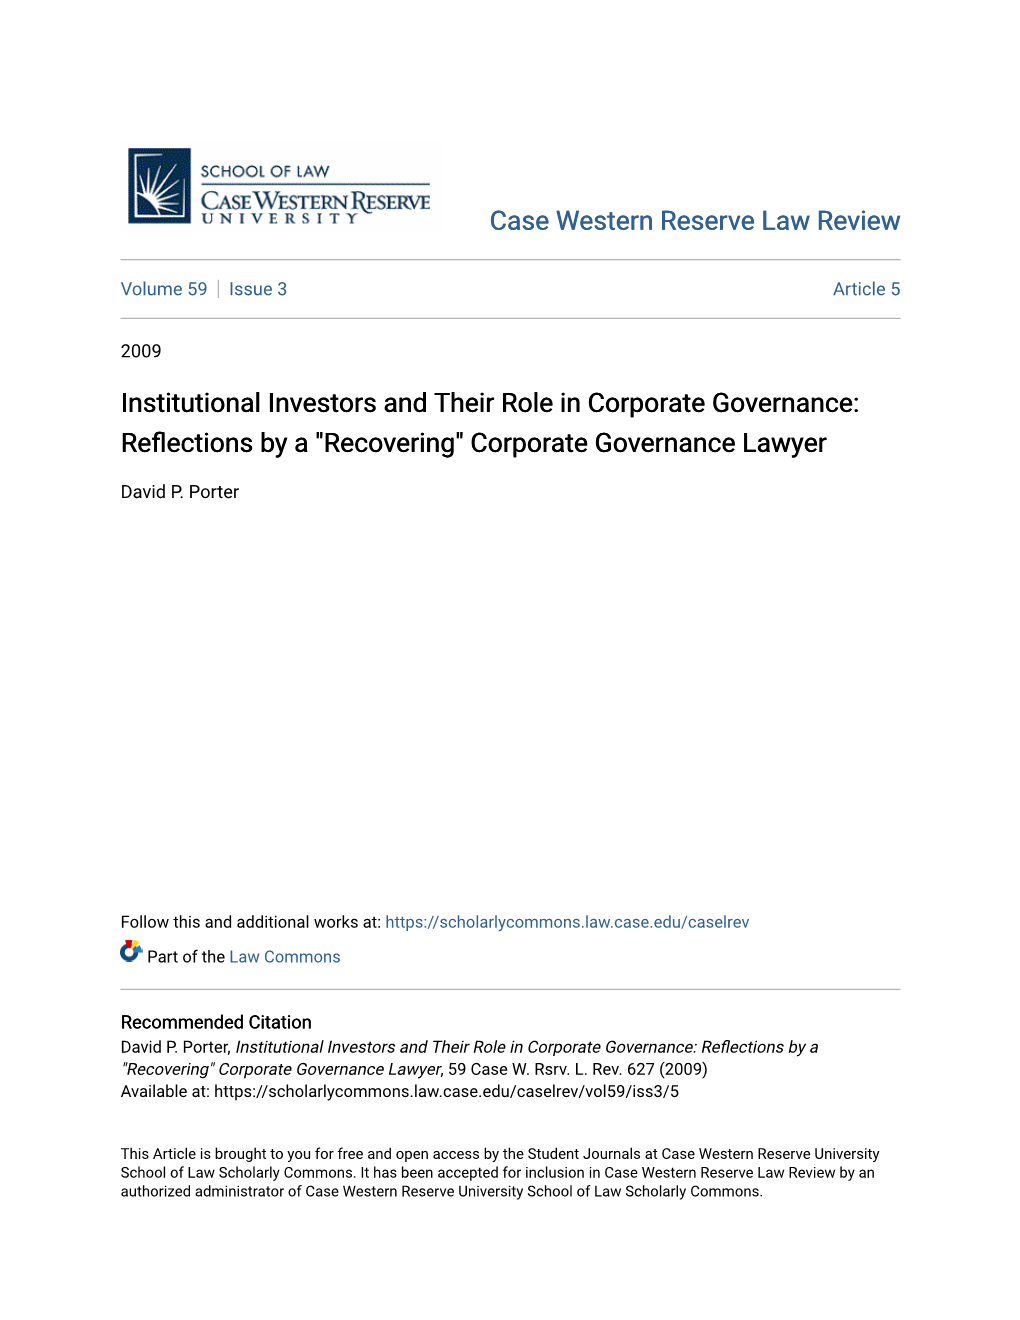 Institutional Investors and Their Role in Corporate Governance: Reflections Yb a "Recovering" Corporate Governance Lawyer